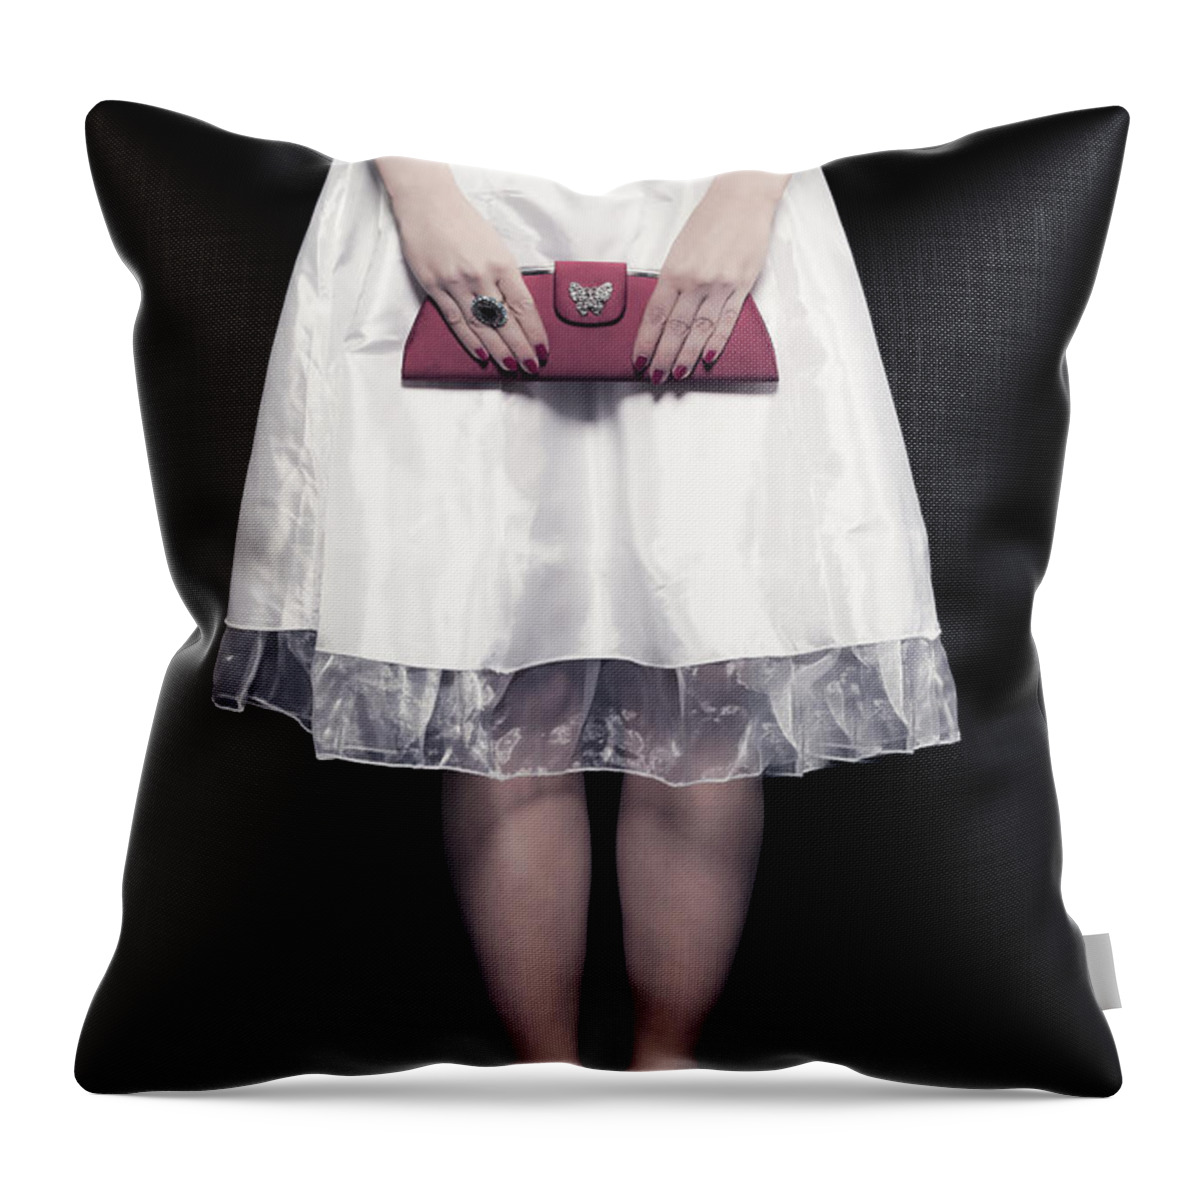 Woman Throw Pillow featuring the photograph Red Handbag #1 by Joana Kruse